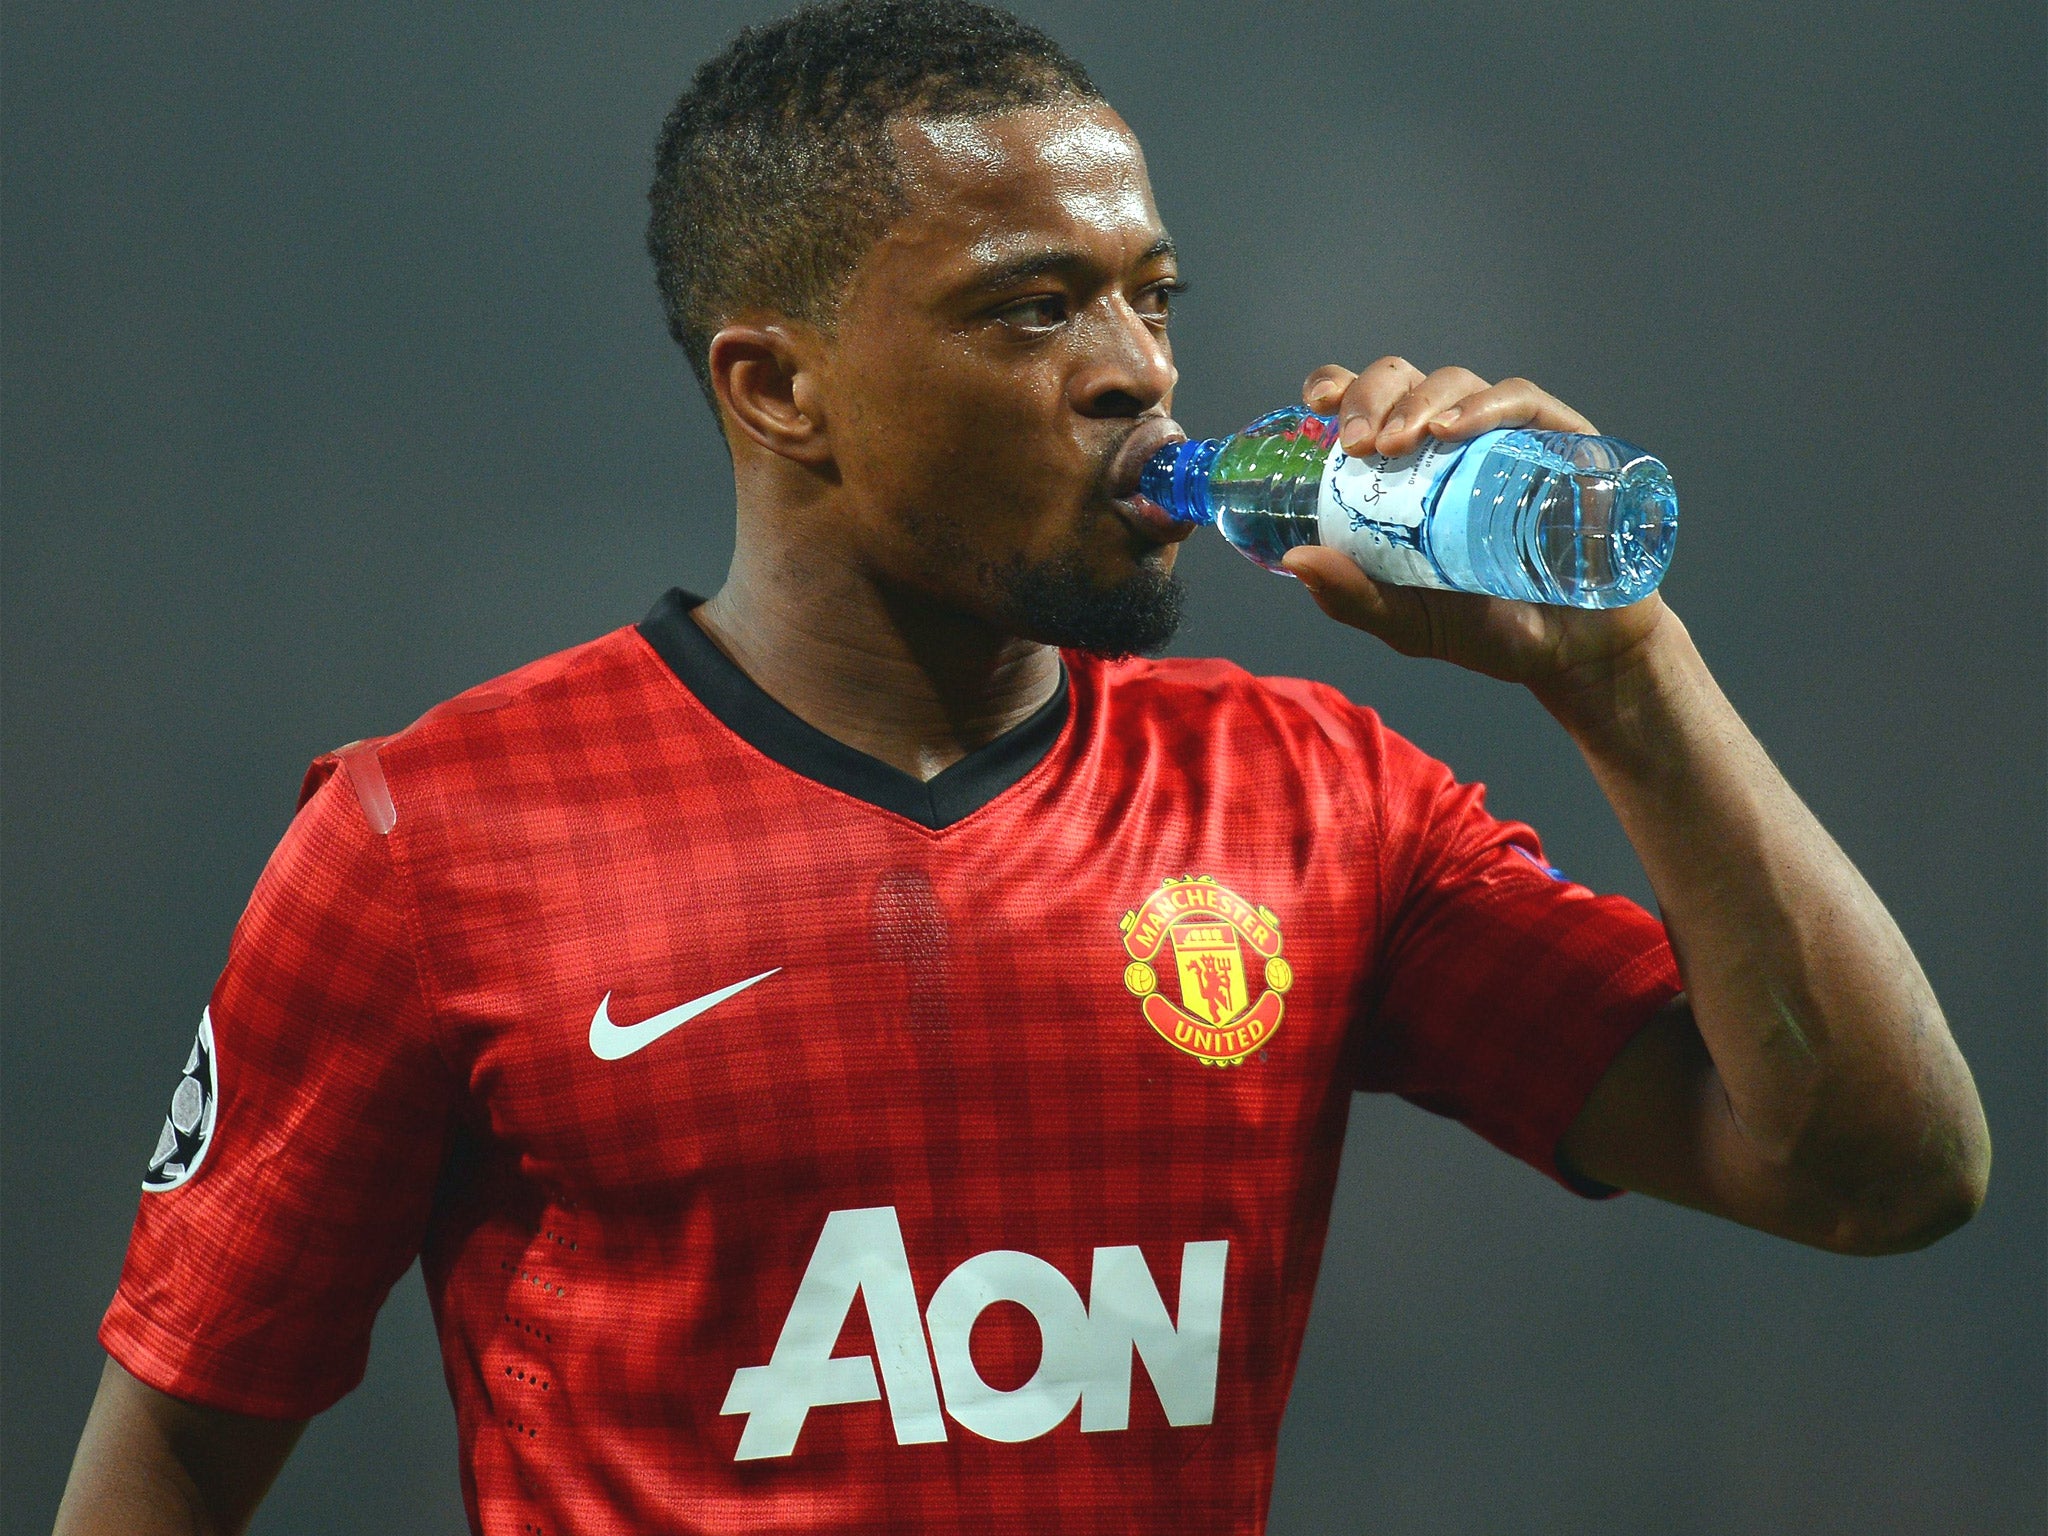 United are keen to keep Patrice Evra